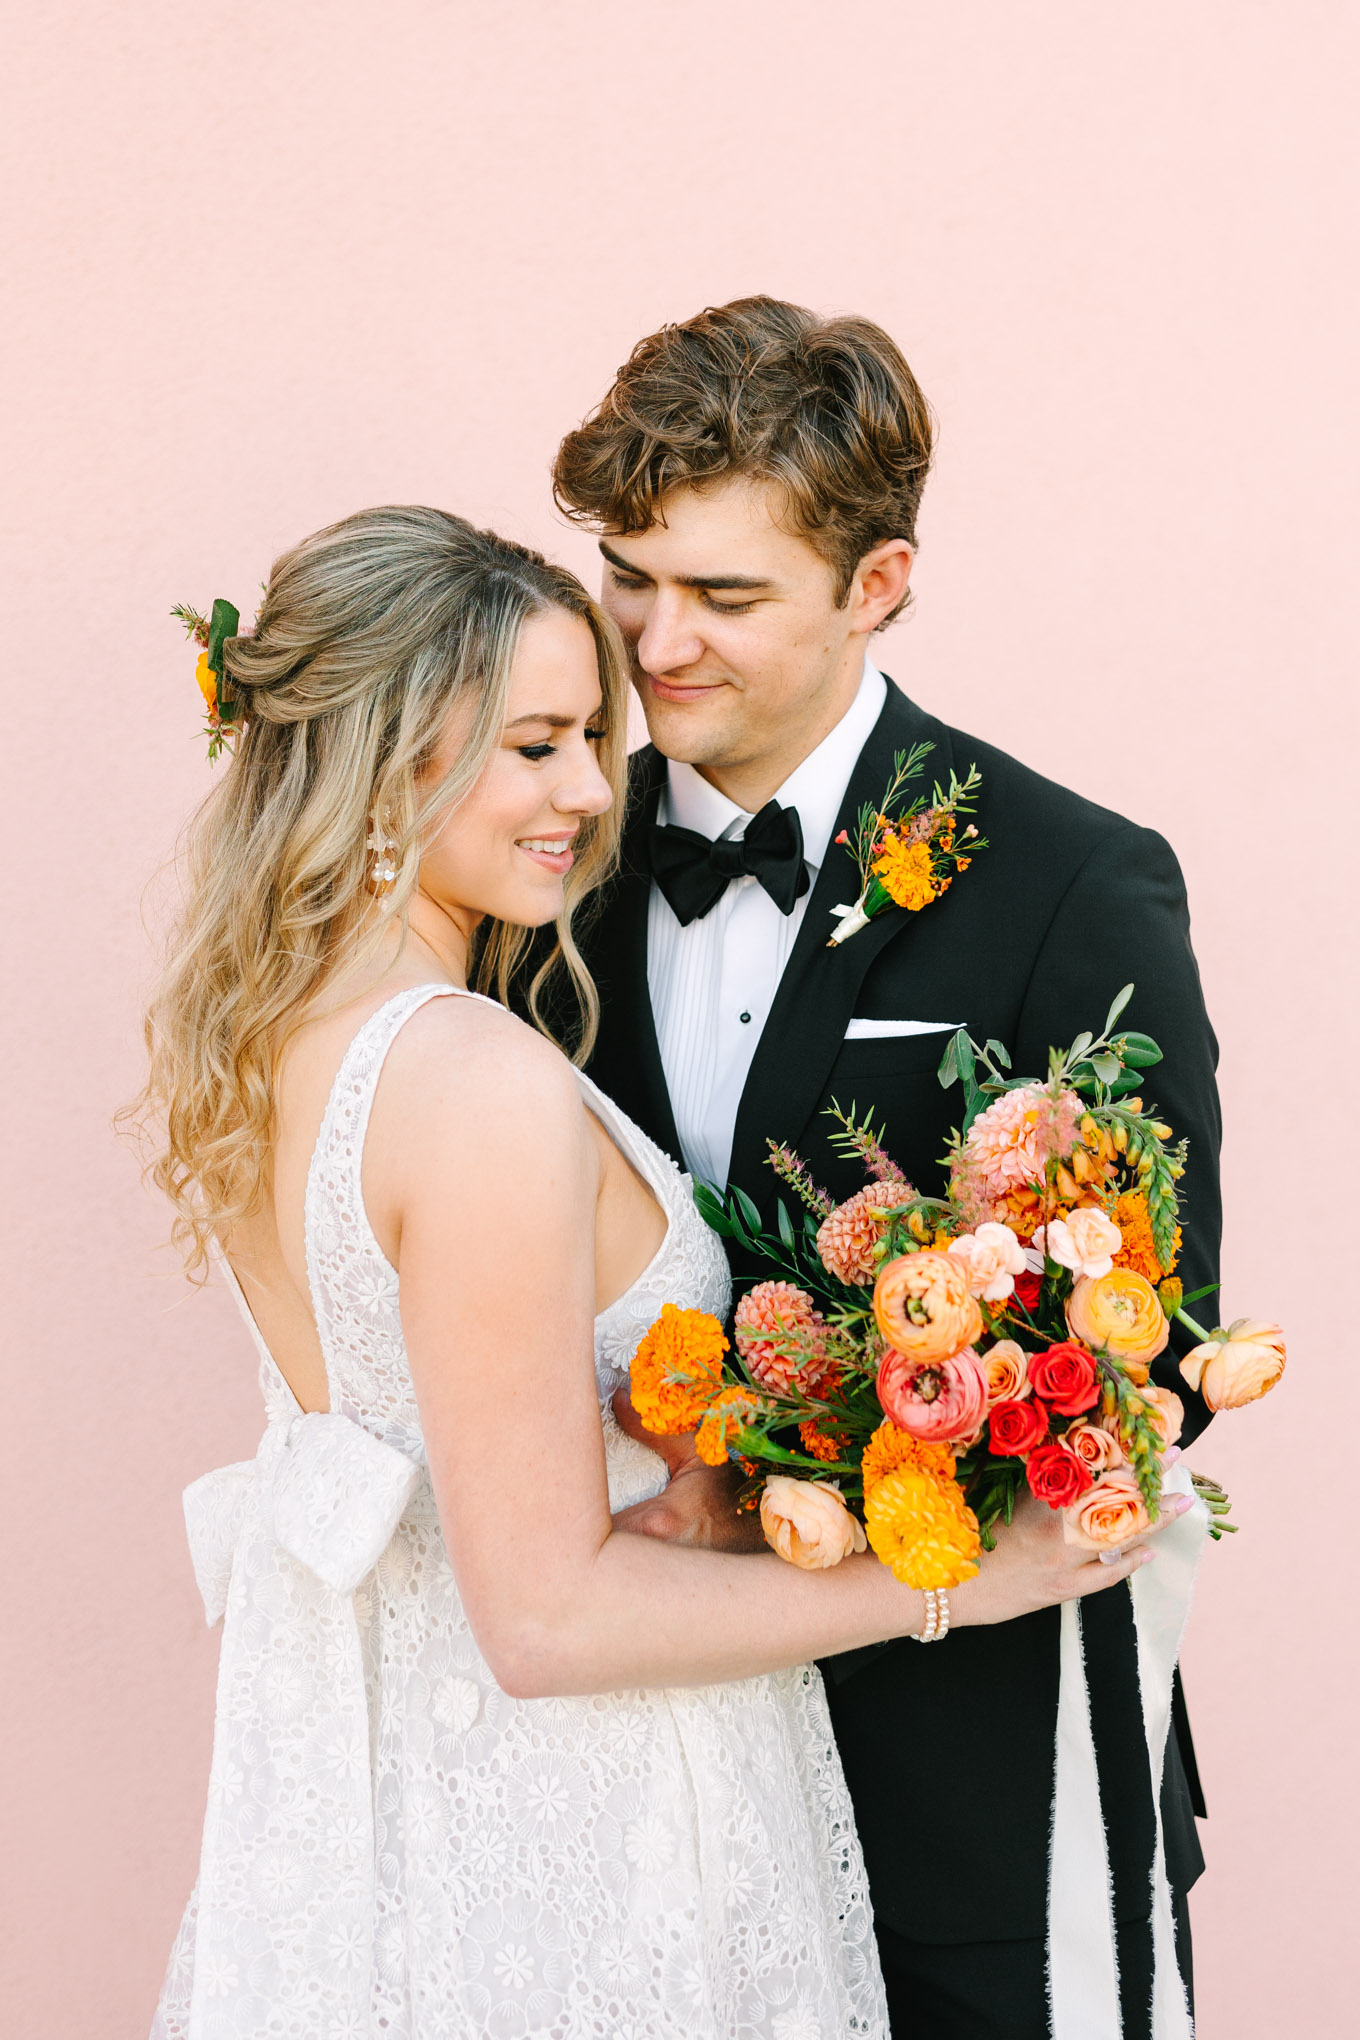 Santa Barbara Elopement | Wedding and elopement photography roundup | Los Angeles and Palm Springs  photographer | #losangeleswedding #palmspringswedding #elopementphotographer

Source: Mary Costa Photography | Los Angeles